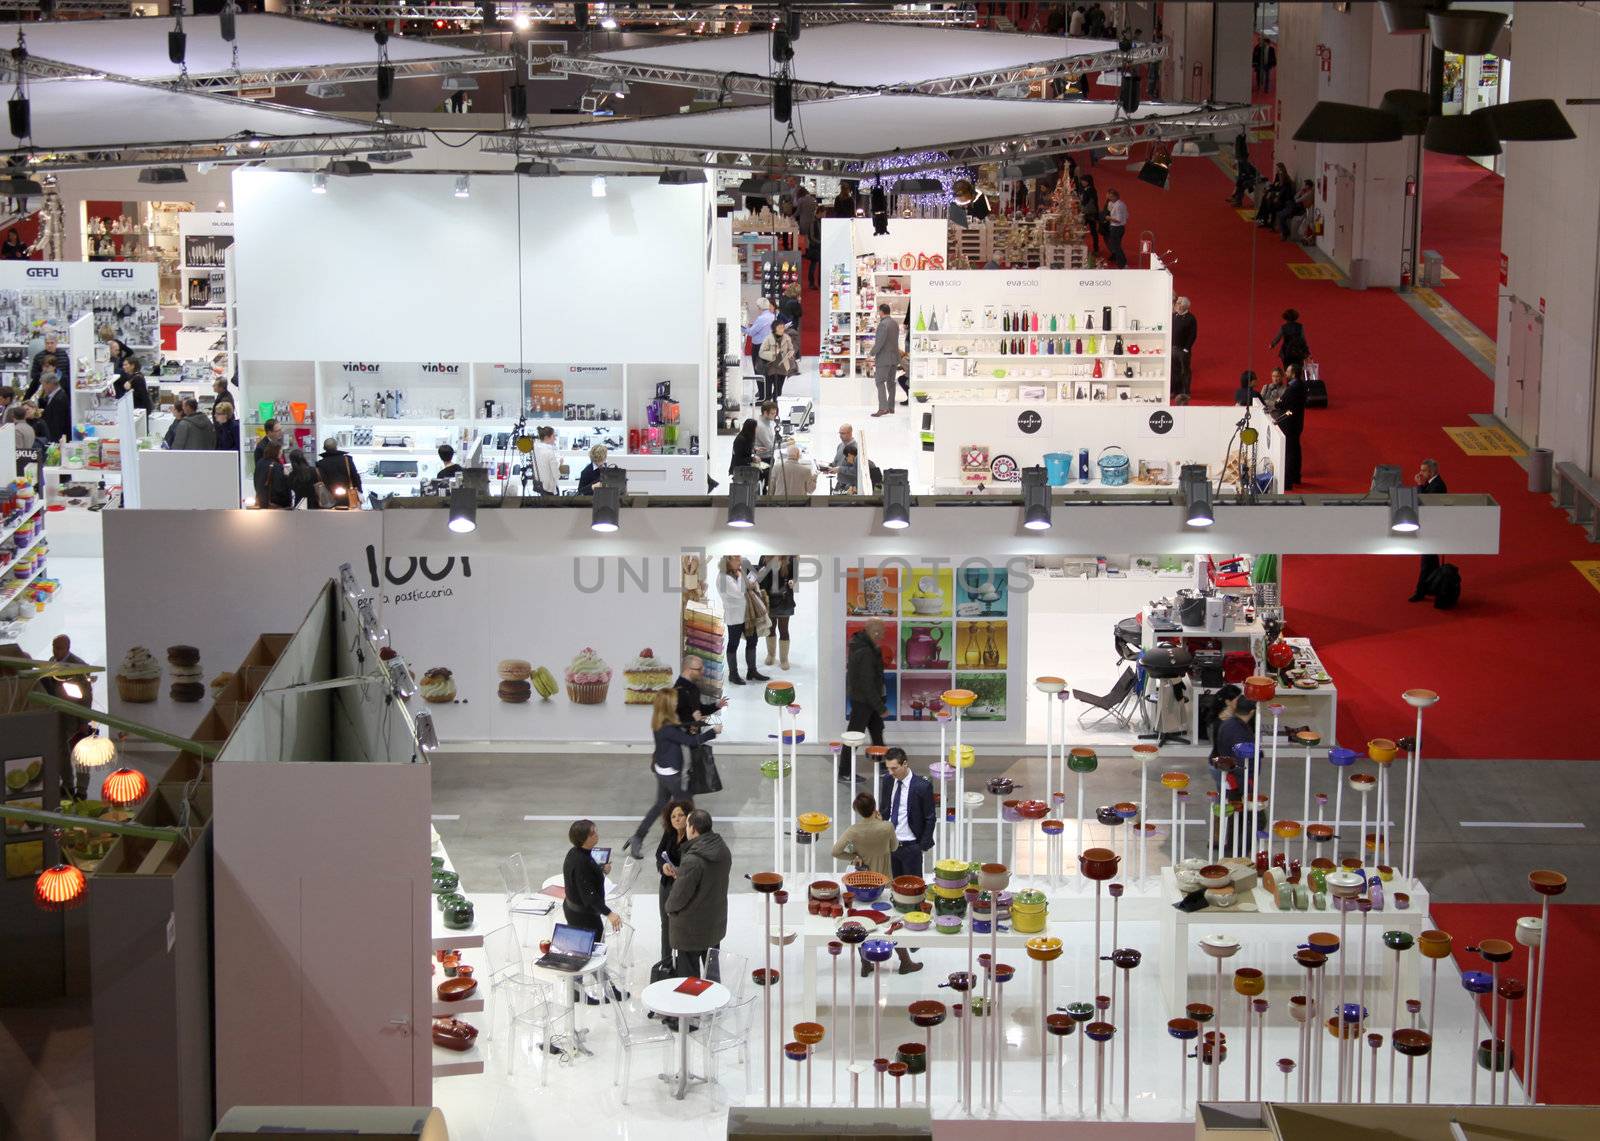 Panoramic view of people visiting Macef, International Home Show Exhibition dedicated to interior design, home luxury and furniture innovation in Milan, Italy.